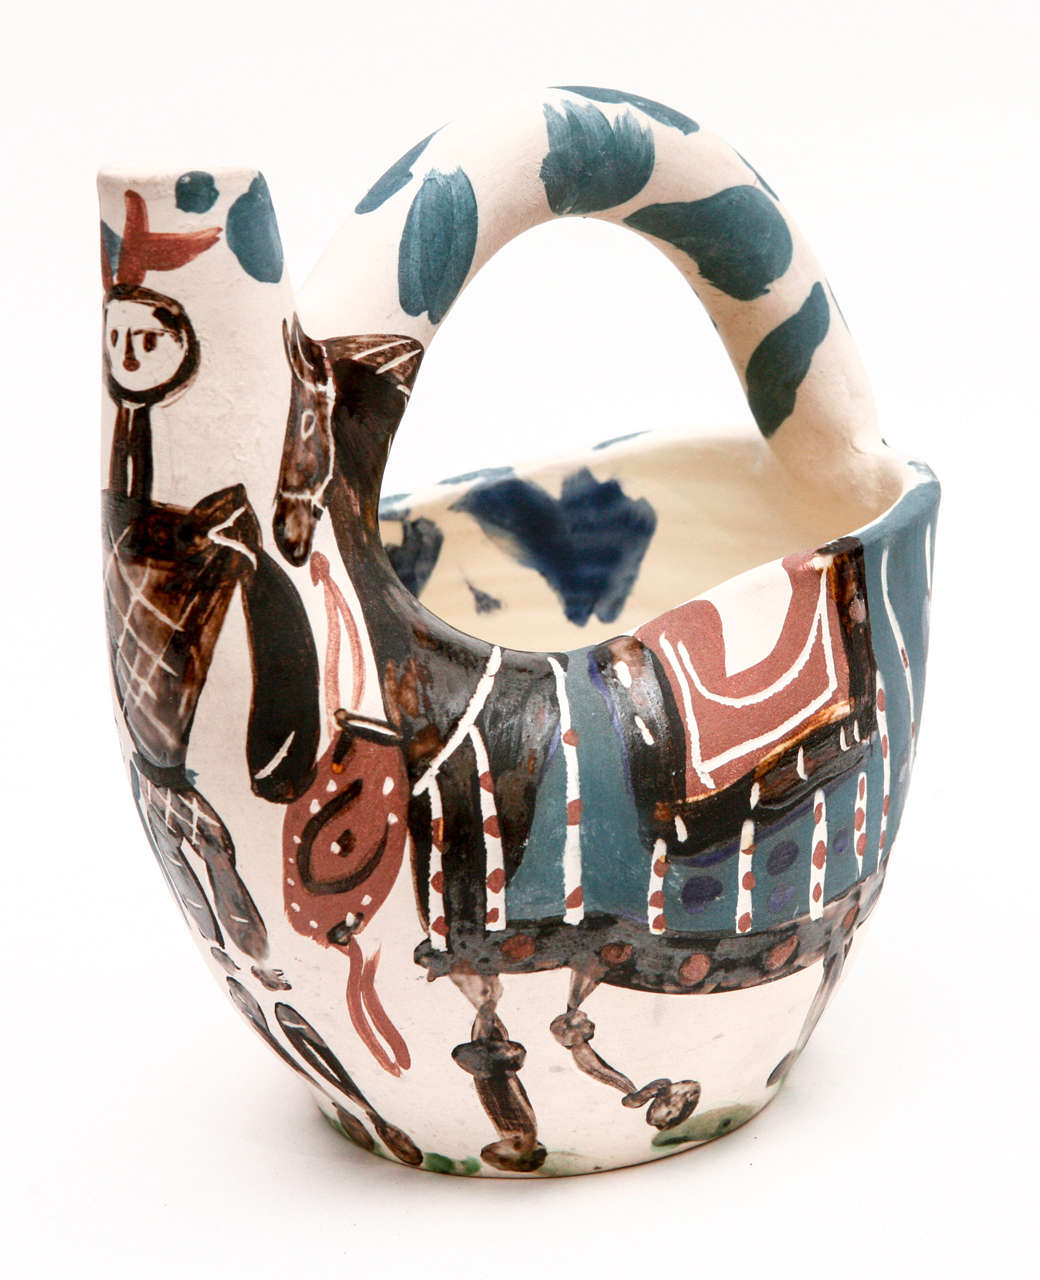 Beautifully decorated and colored, the Cavlier et Cheval (A.R. 137) ceramic pitcher by Pablo Picasso is partially glazed white earthenware clay and is numbered 112/300. Marked 'Edition Picasso' and 'Madoura' and with the 'Edition Picasso' pottery